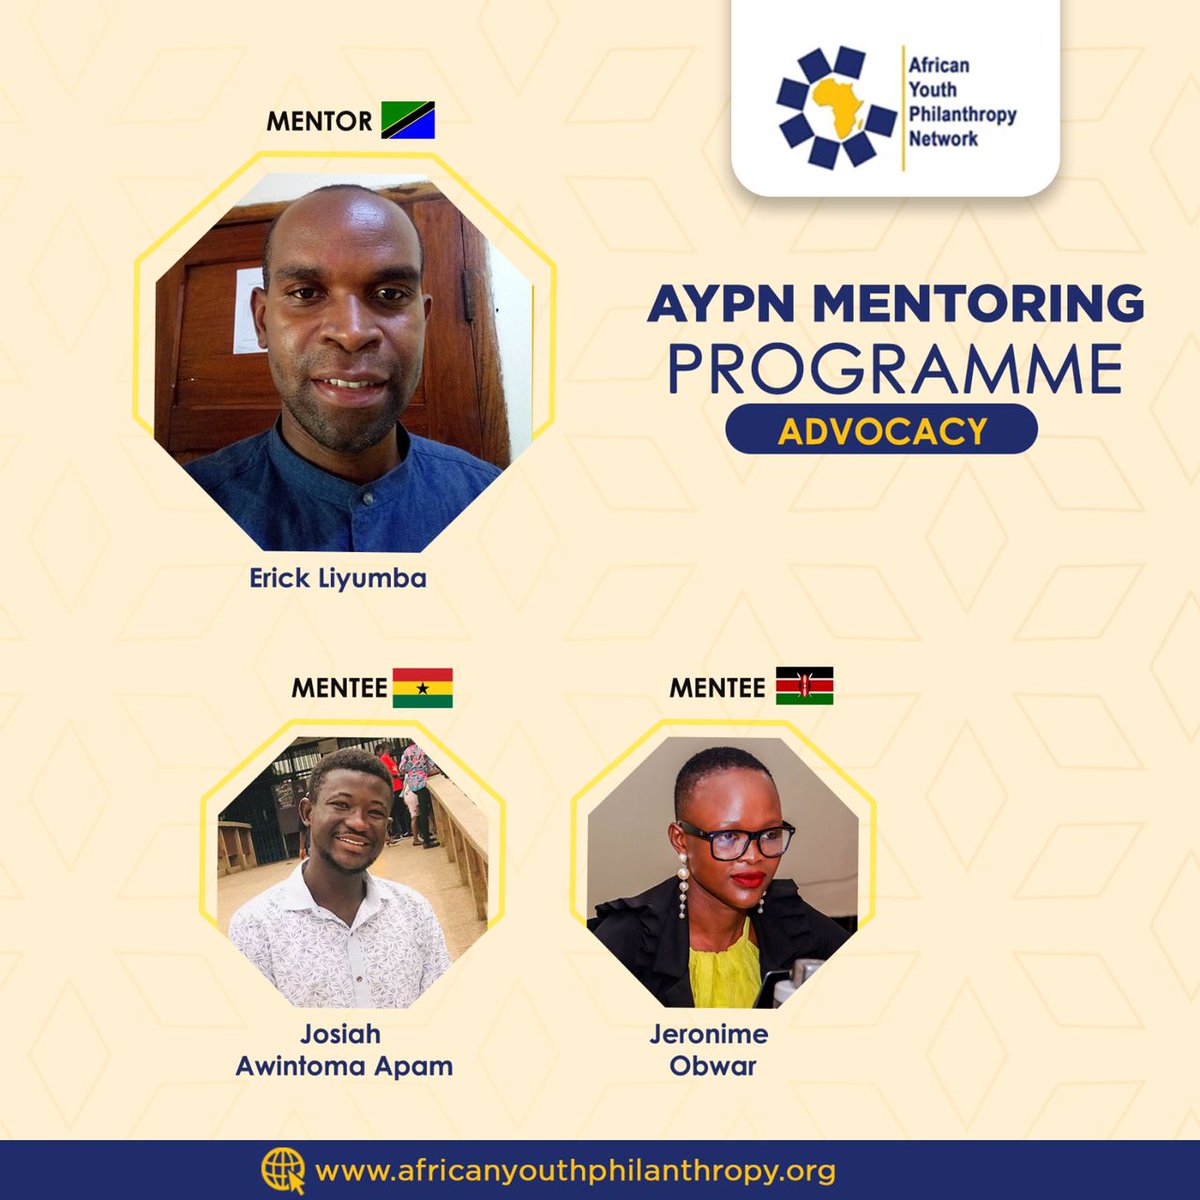 Hoping for the very best in the years to come.
Visioned at touching more lives in the near future. #LiftUpPhilanthropy #AFRICANYOUTHPHILANTHROPY #AfricanPhilanthropy 
@wings_info
@aypnafrica
@CAPSIAfrica
@EuropeanUnion